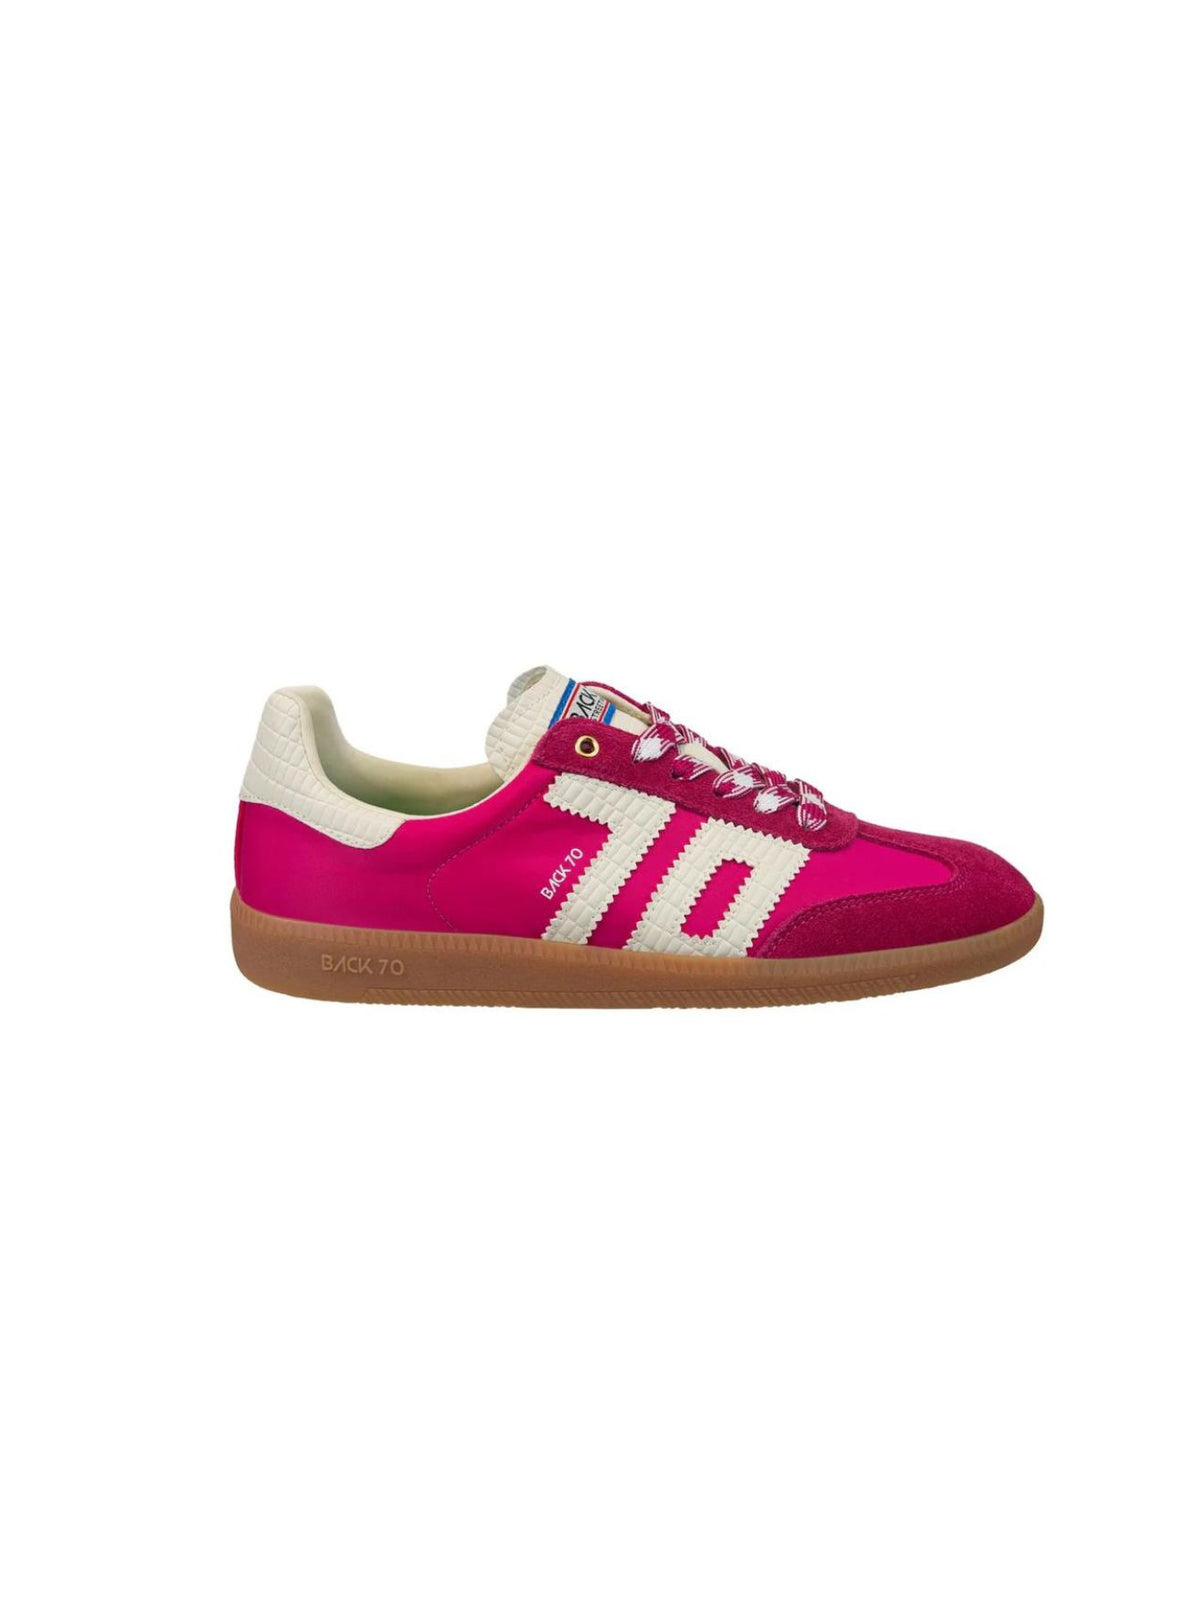 back 70 ghost sneakers in cherry -side